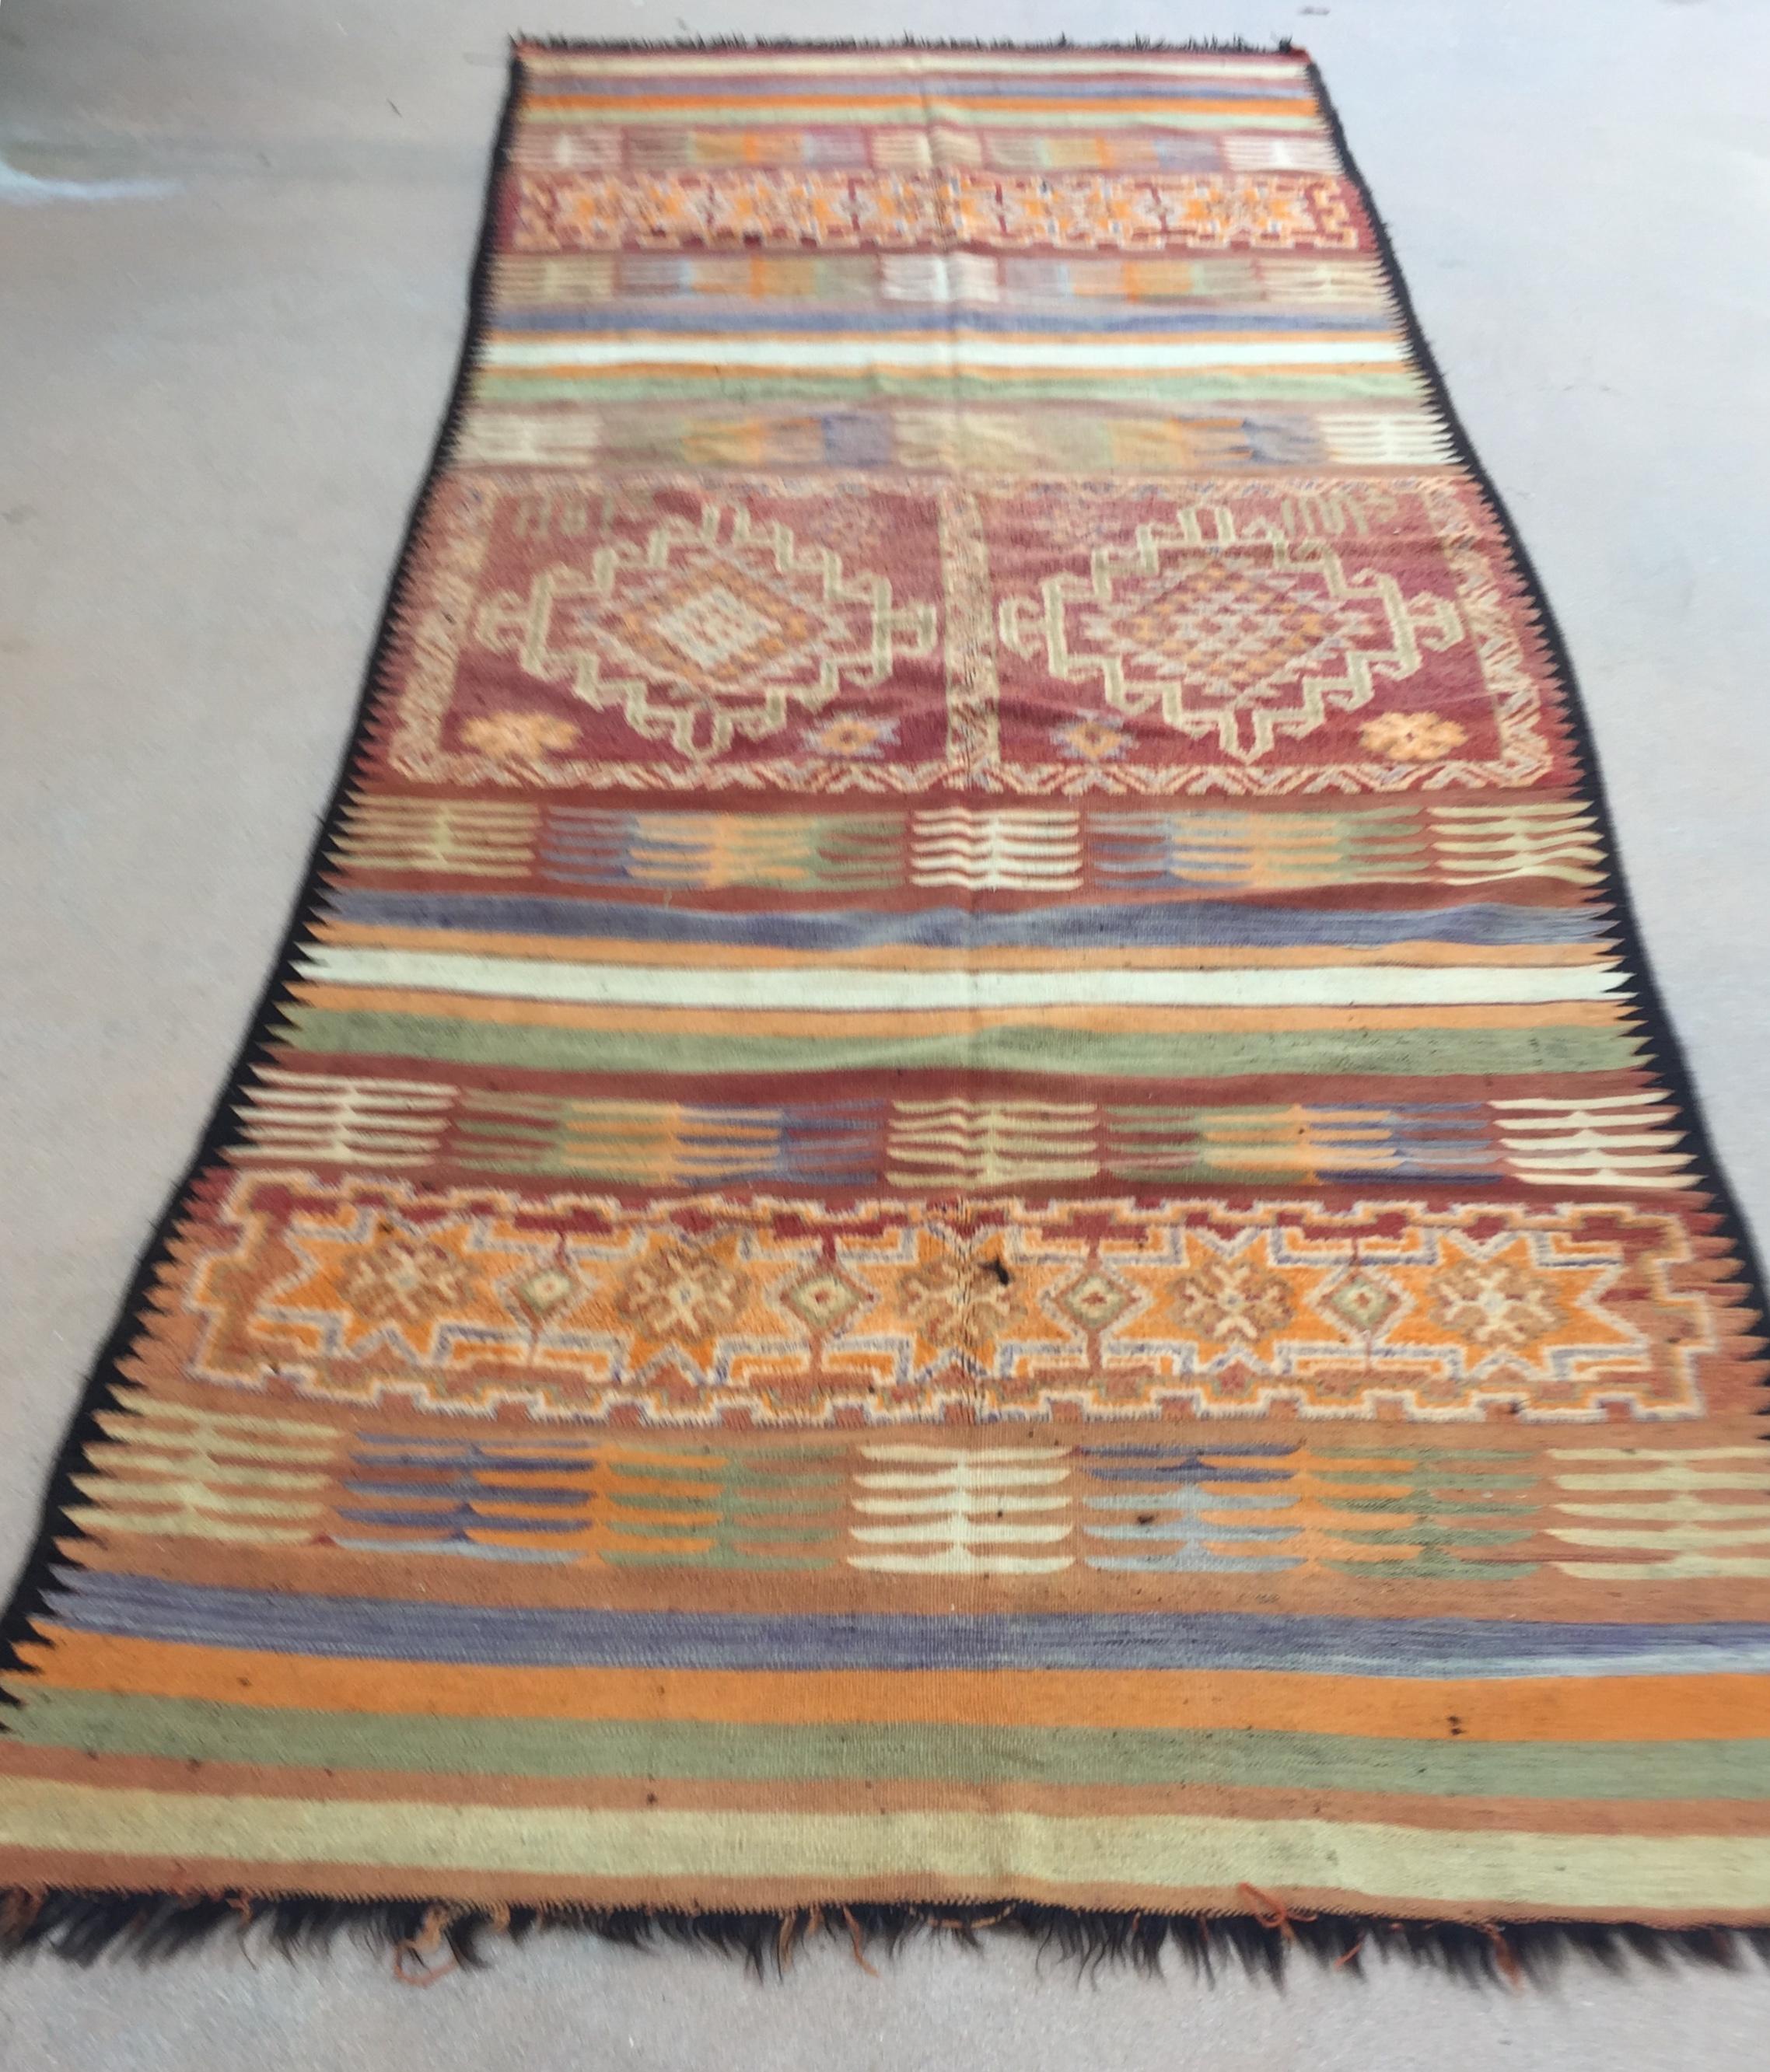 Large authentic vintage 1960s handwoven vintage Moroccan Berber Tribal rug, nicely aged with vivid cors. Vintage Moroccan textile carpet handwoven by the Berber tribes in south Morocco with traditional geometric tribal designs. South of Marrakech